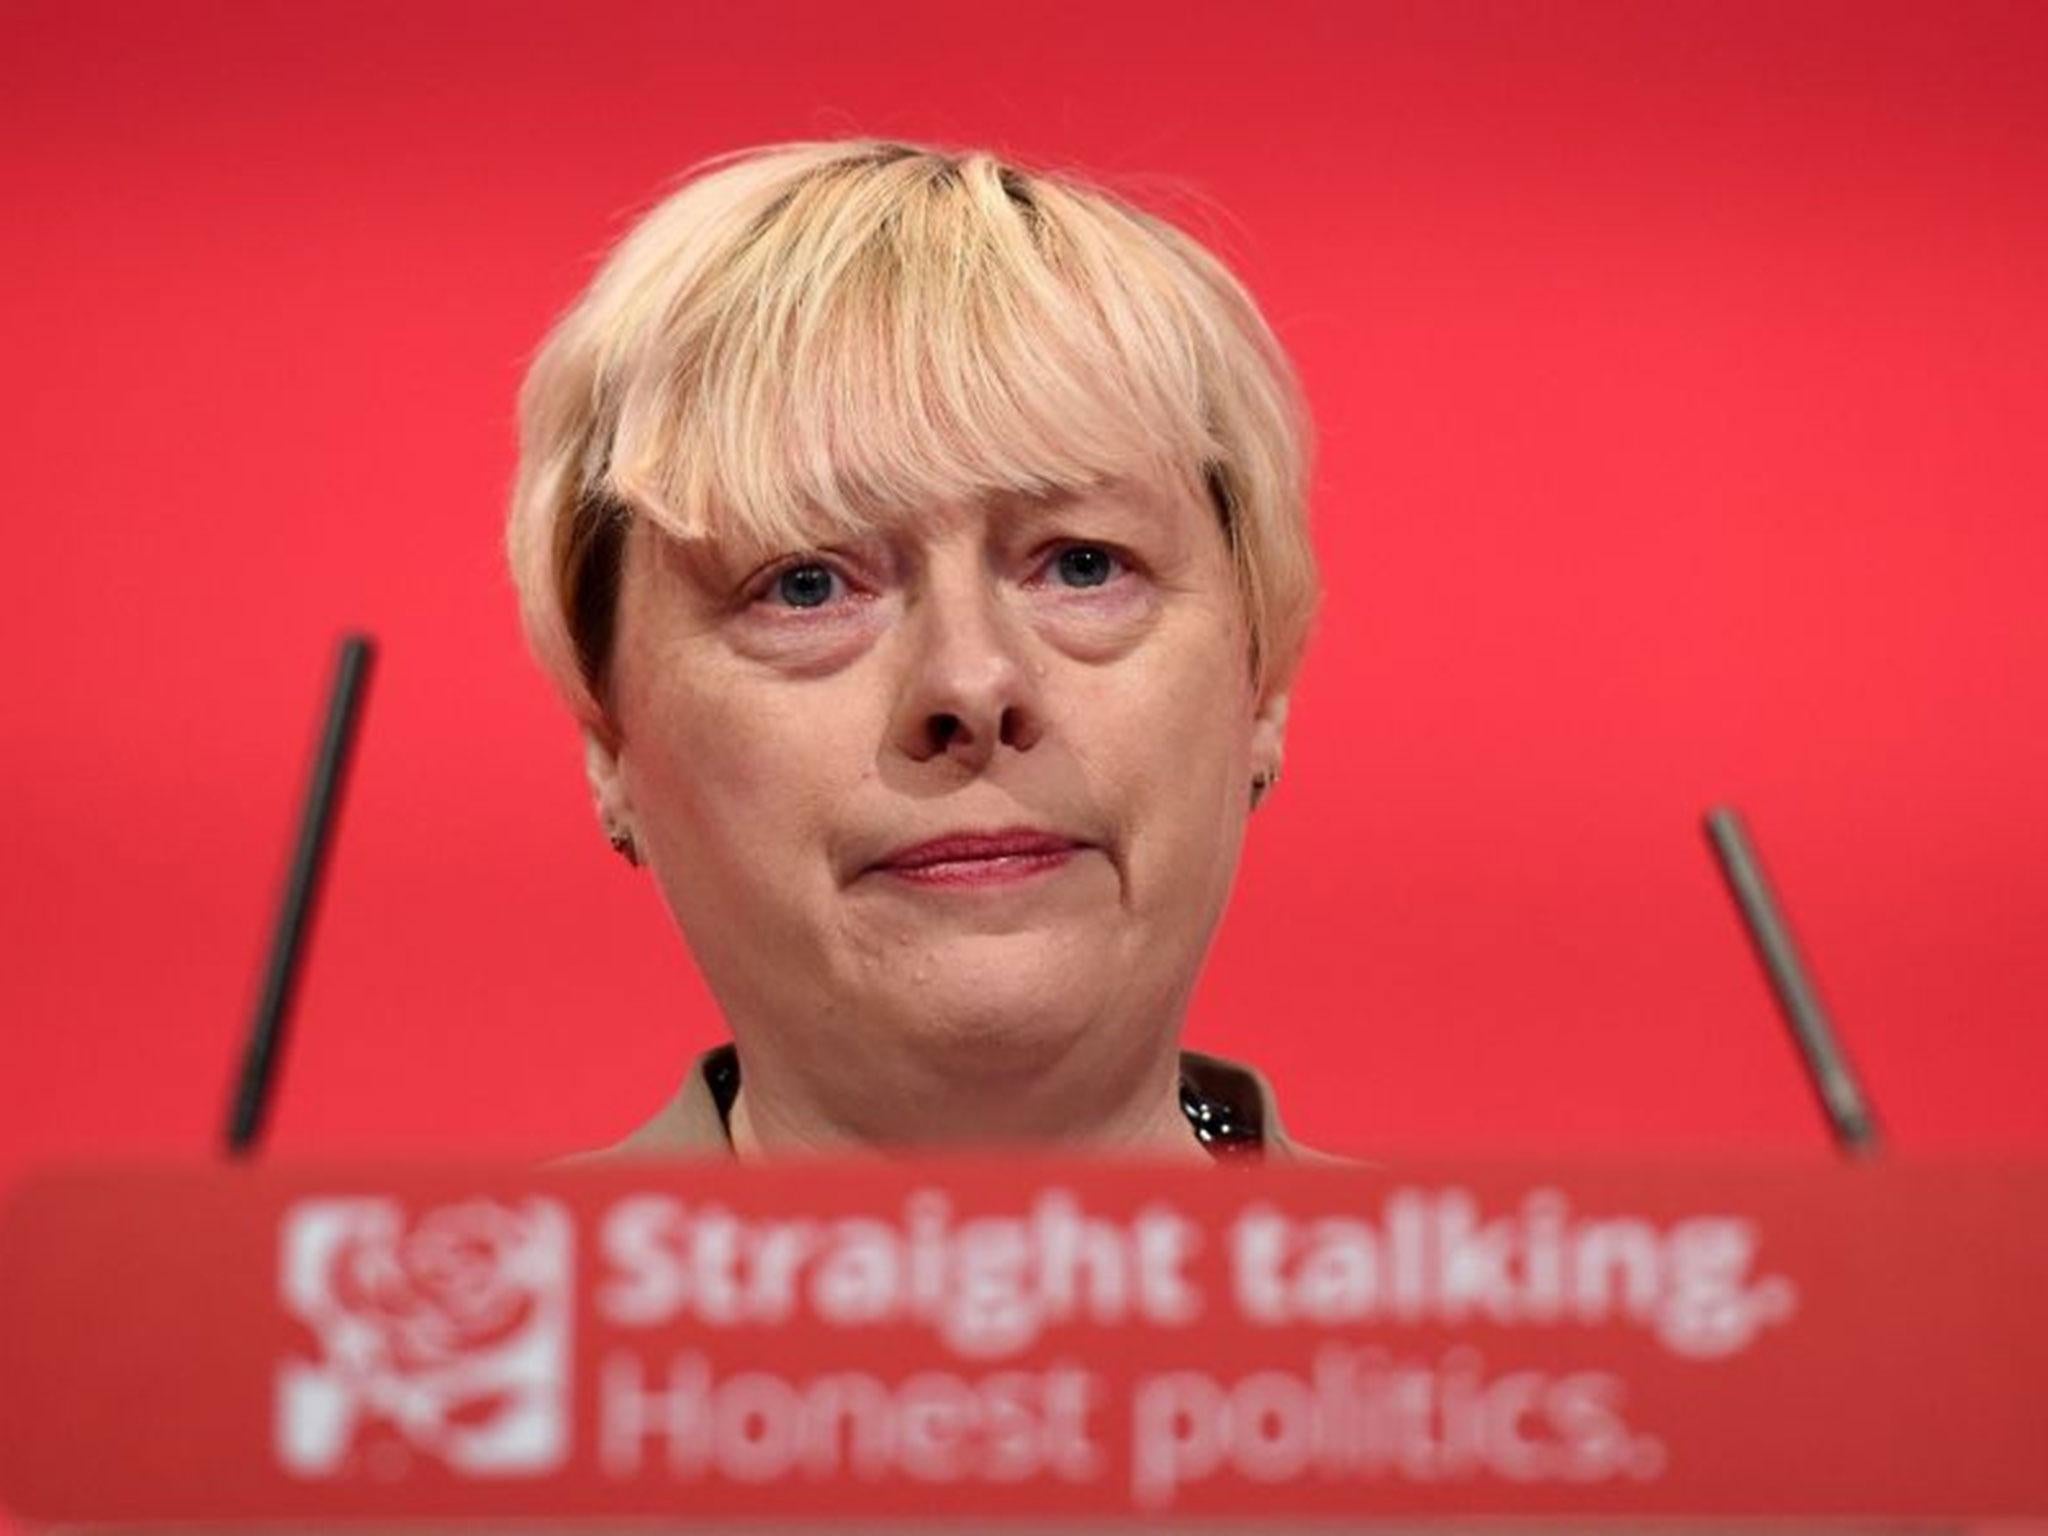 Angela Eagle launched a leadership bid which backfired when Jeremy Corbyn won an even bigger mandate as party leader